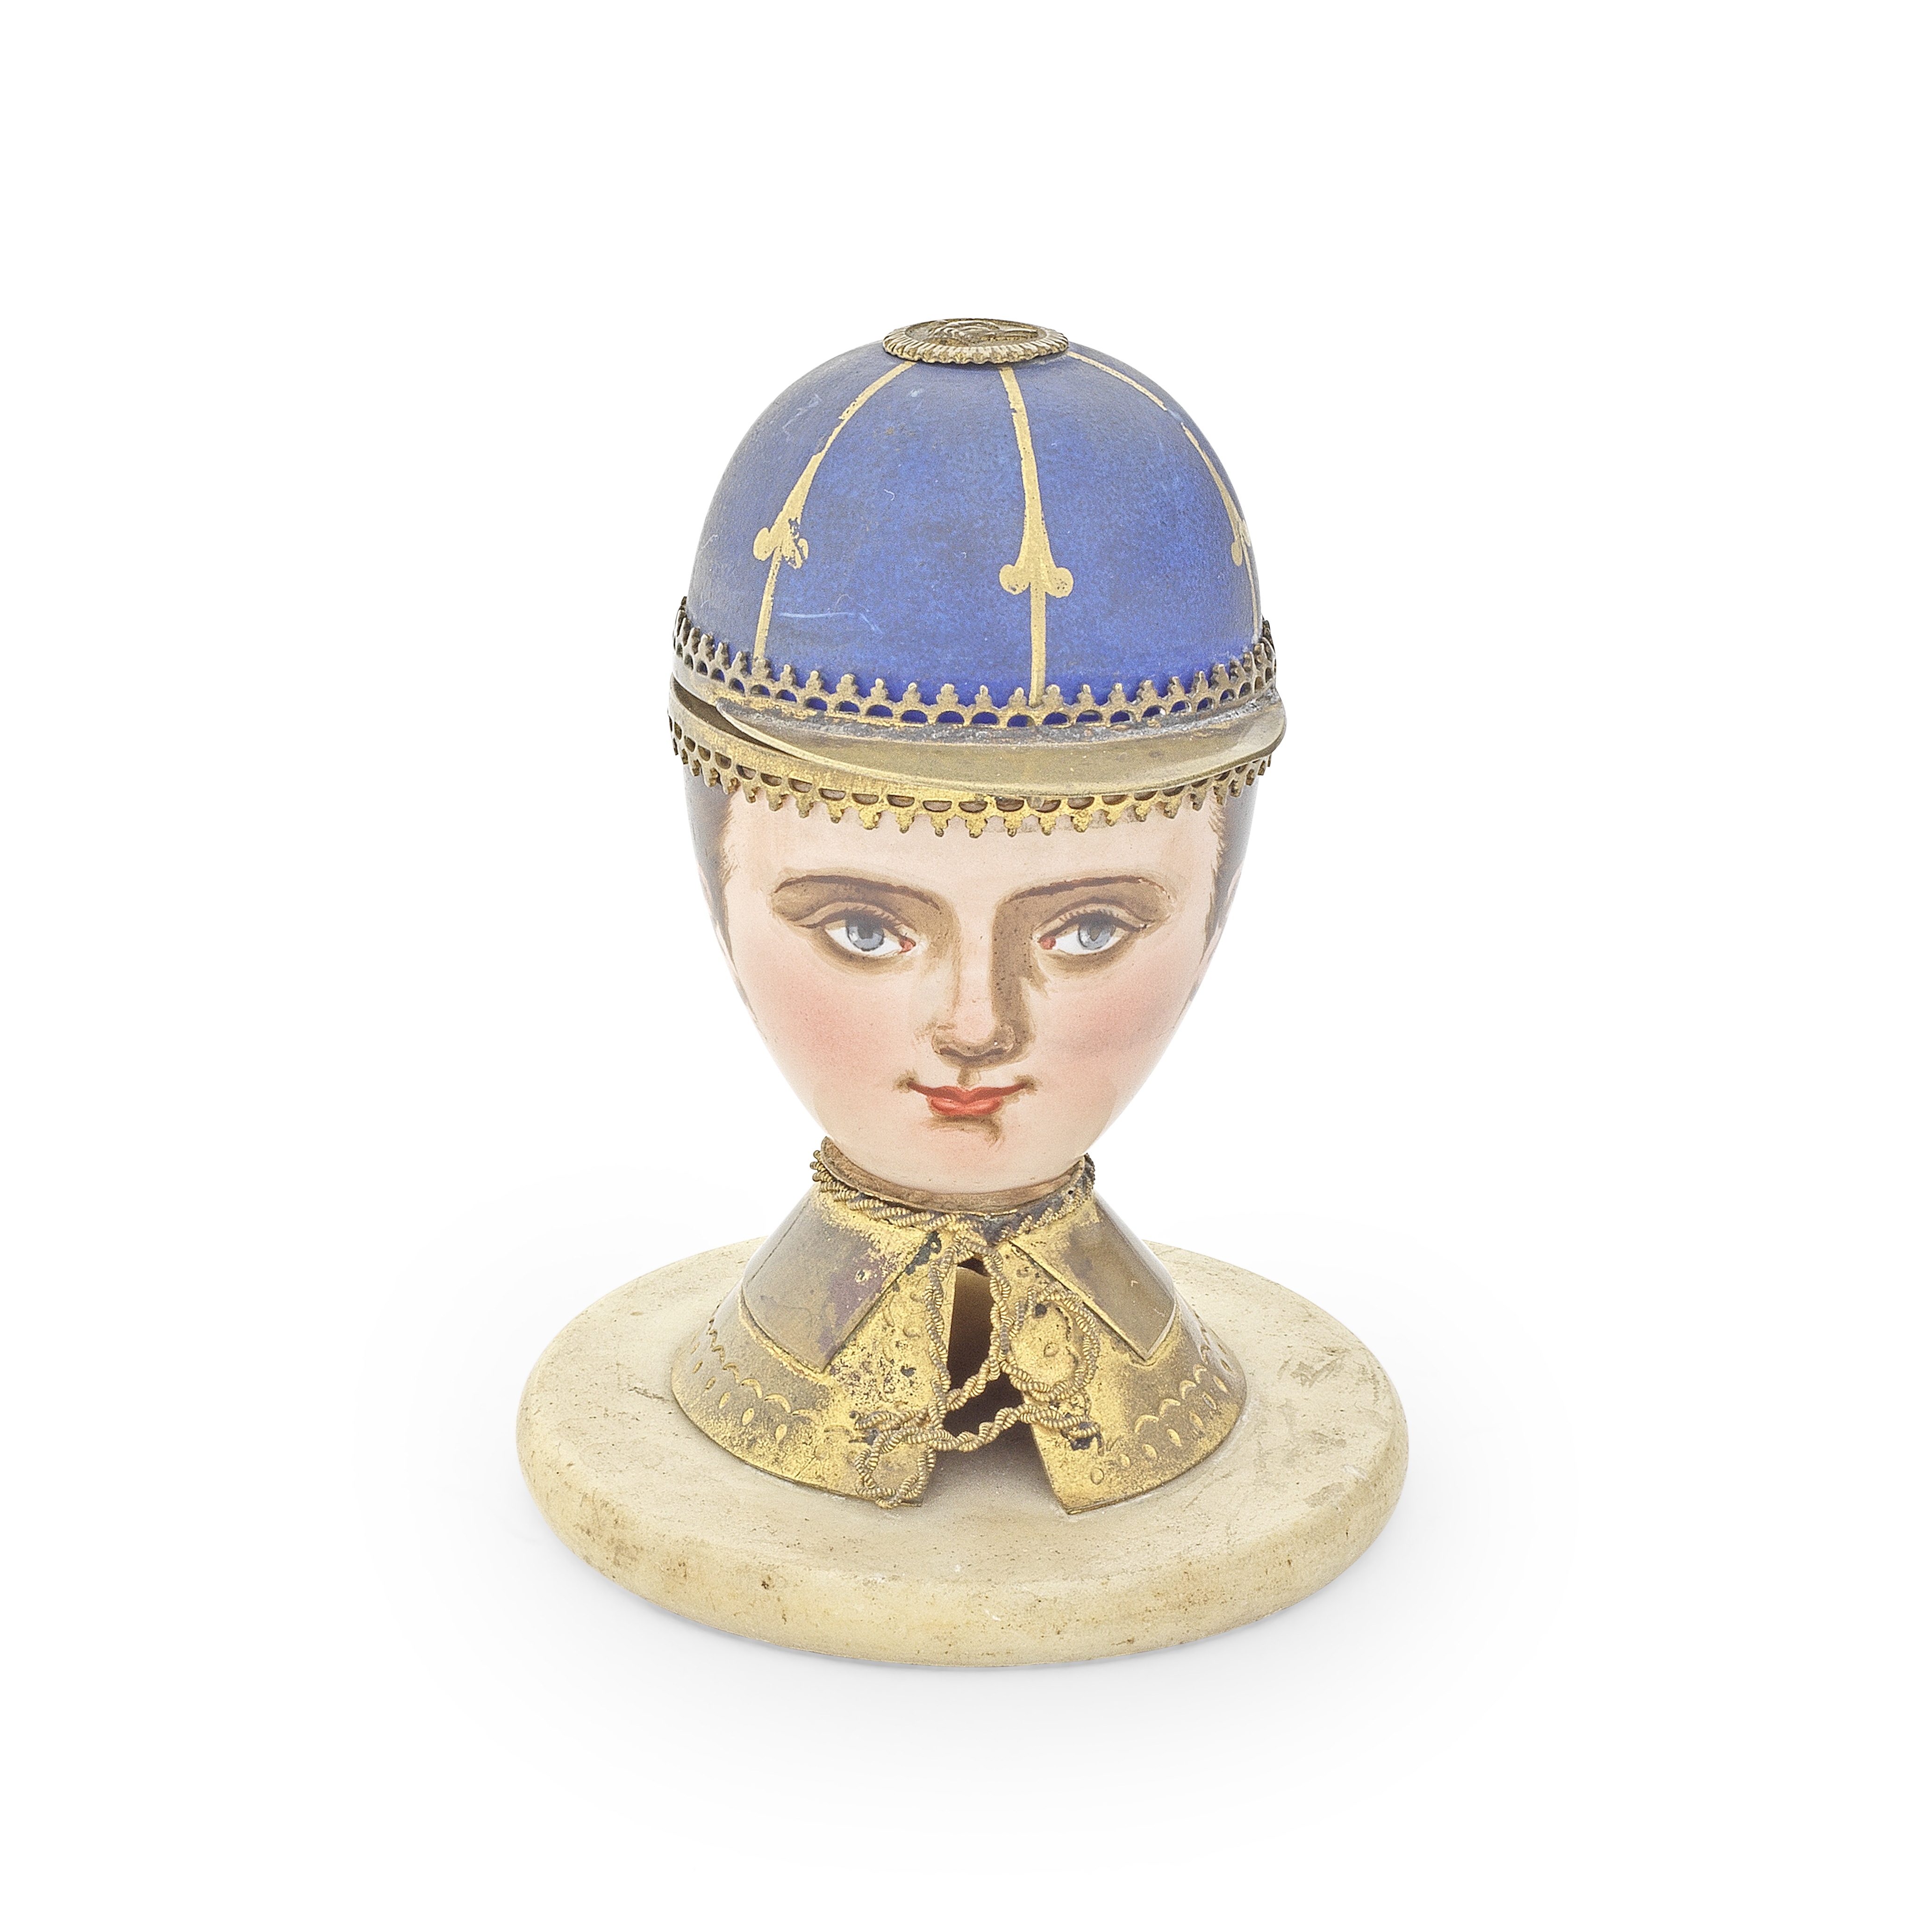 A rare French jockey head box with perfume bottle unmarked, possibly 19th century